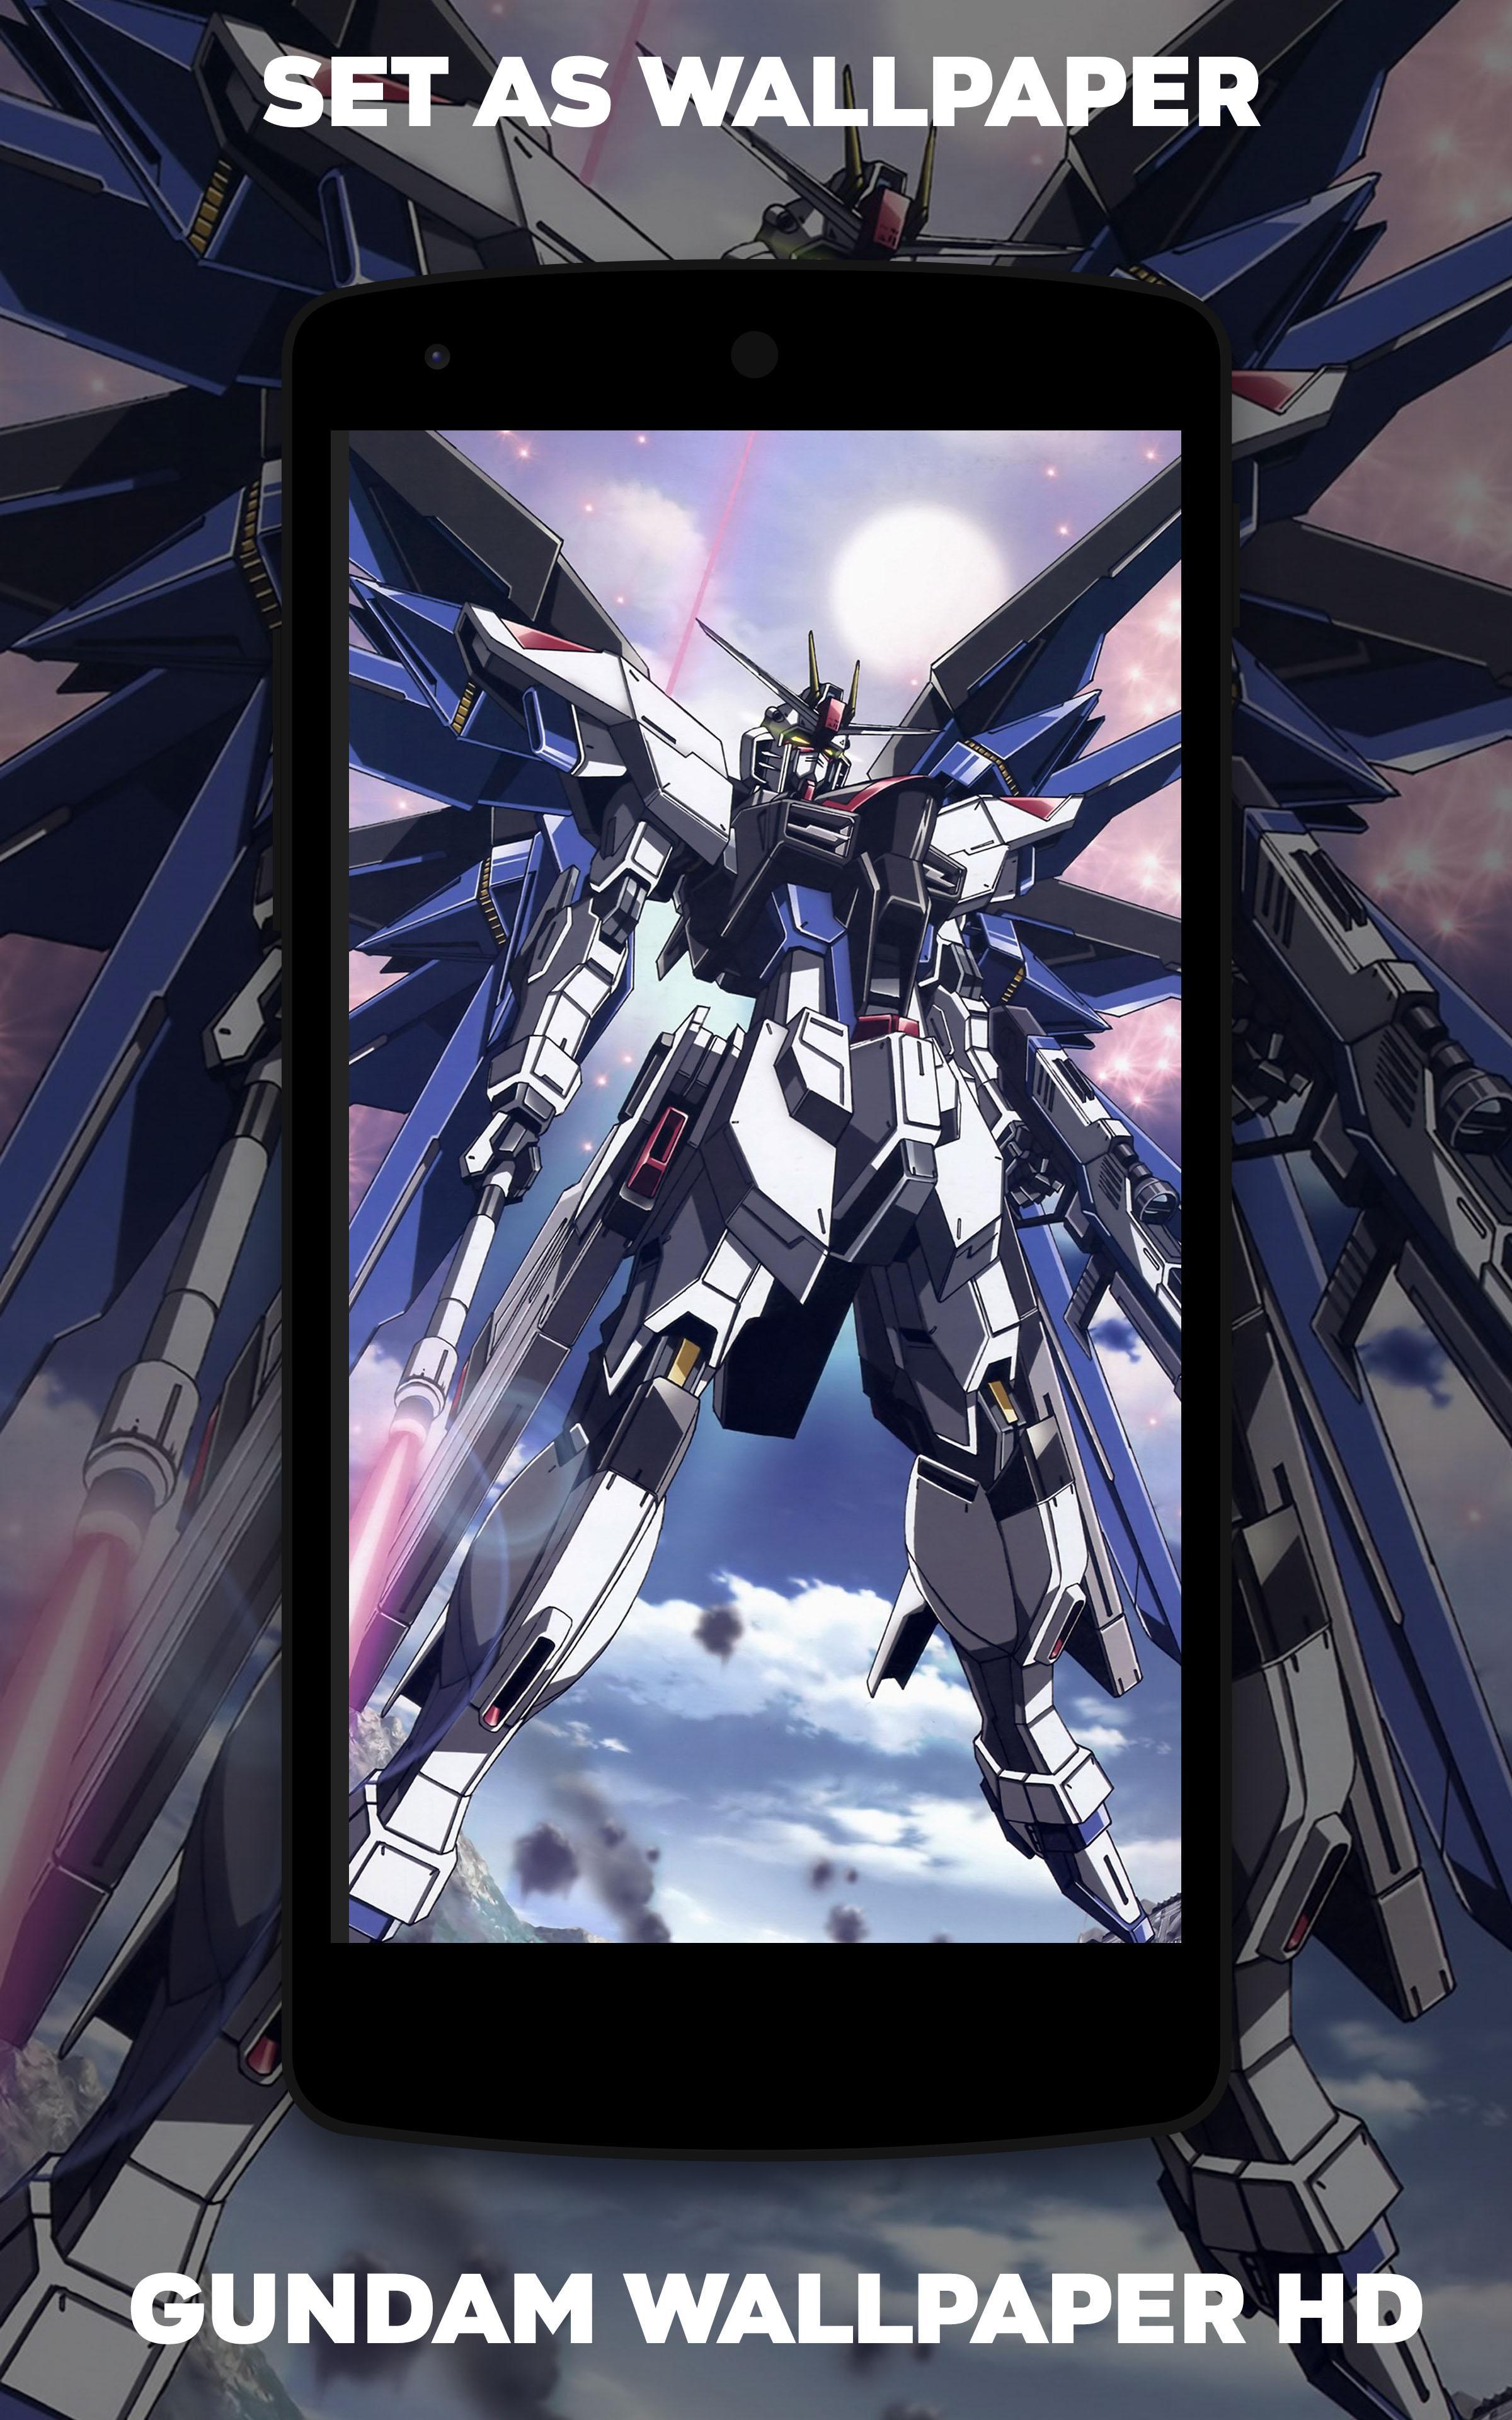 Gundam Wallpaper Hd For Android Apk Download